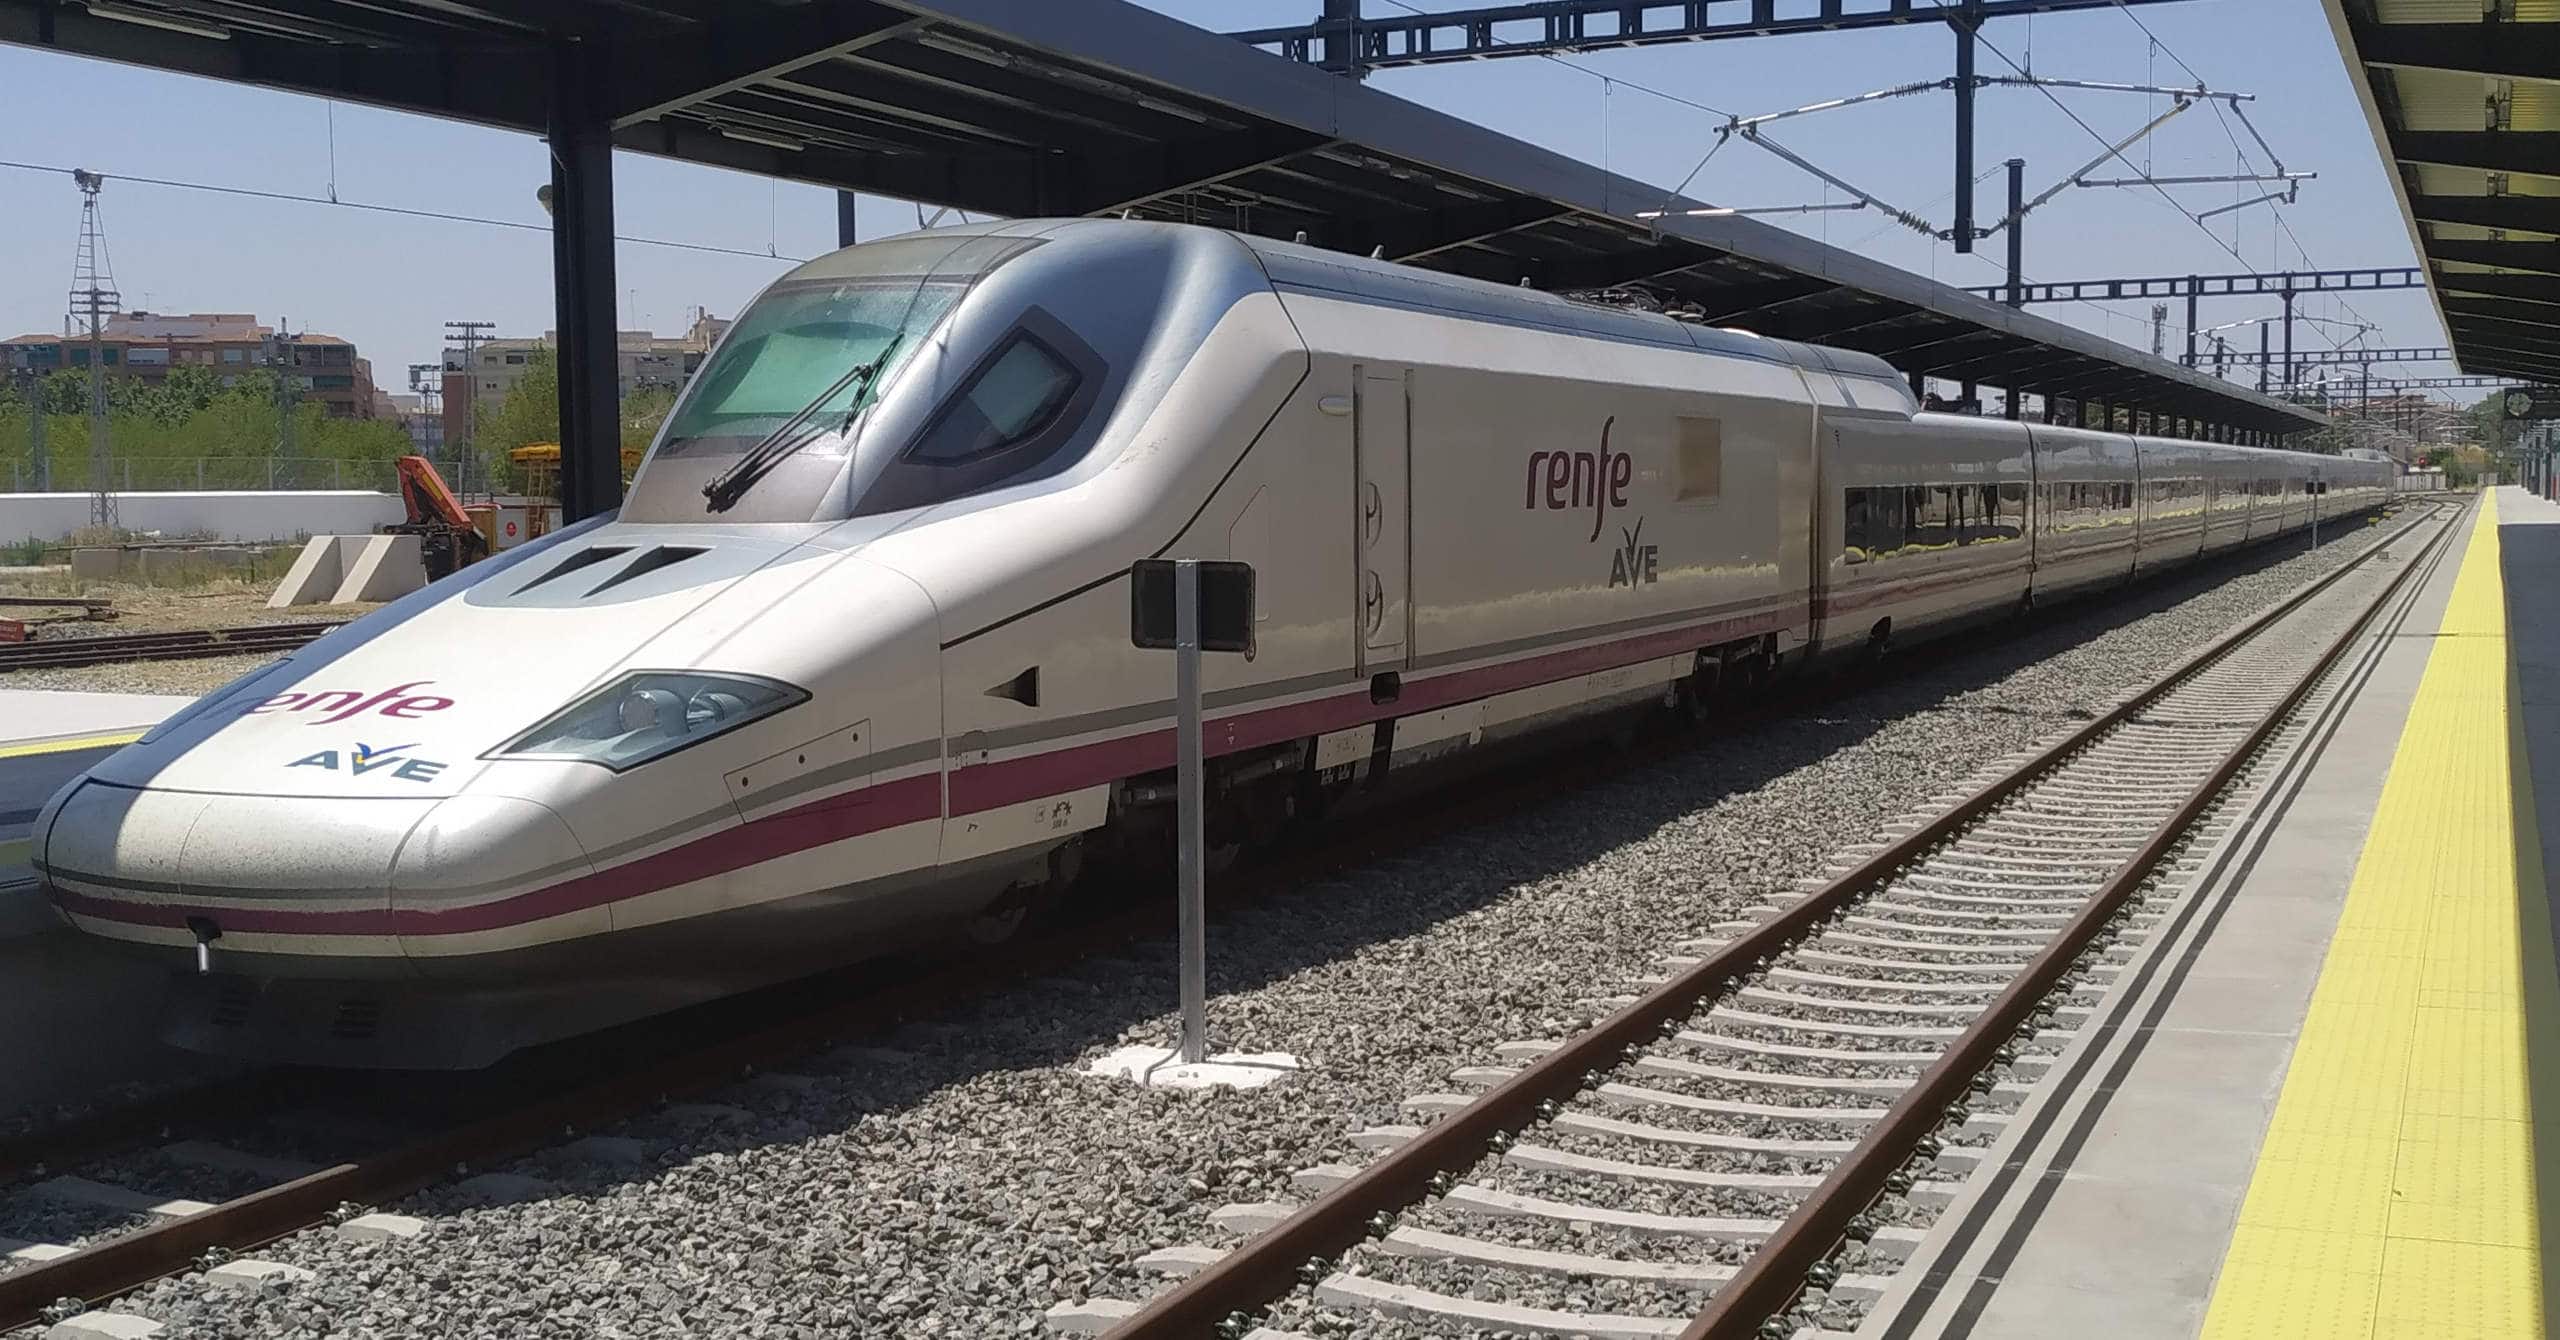 New high-speed train routes in Spain: Renfe will connect Madrid with these two cities this year